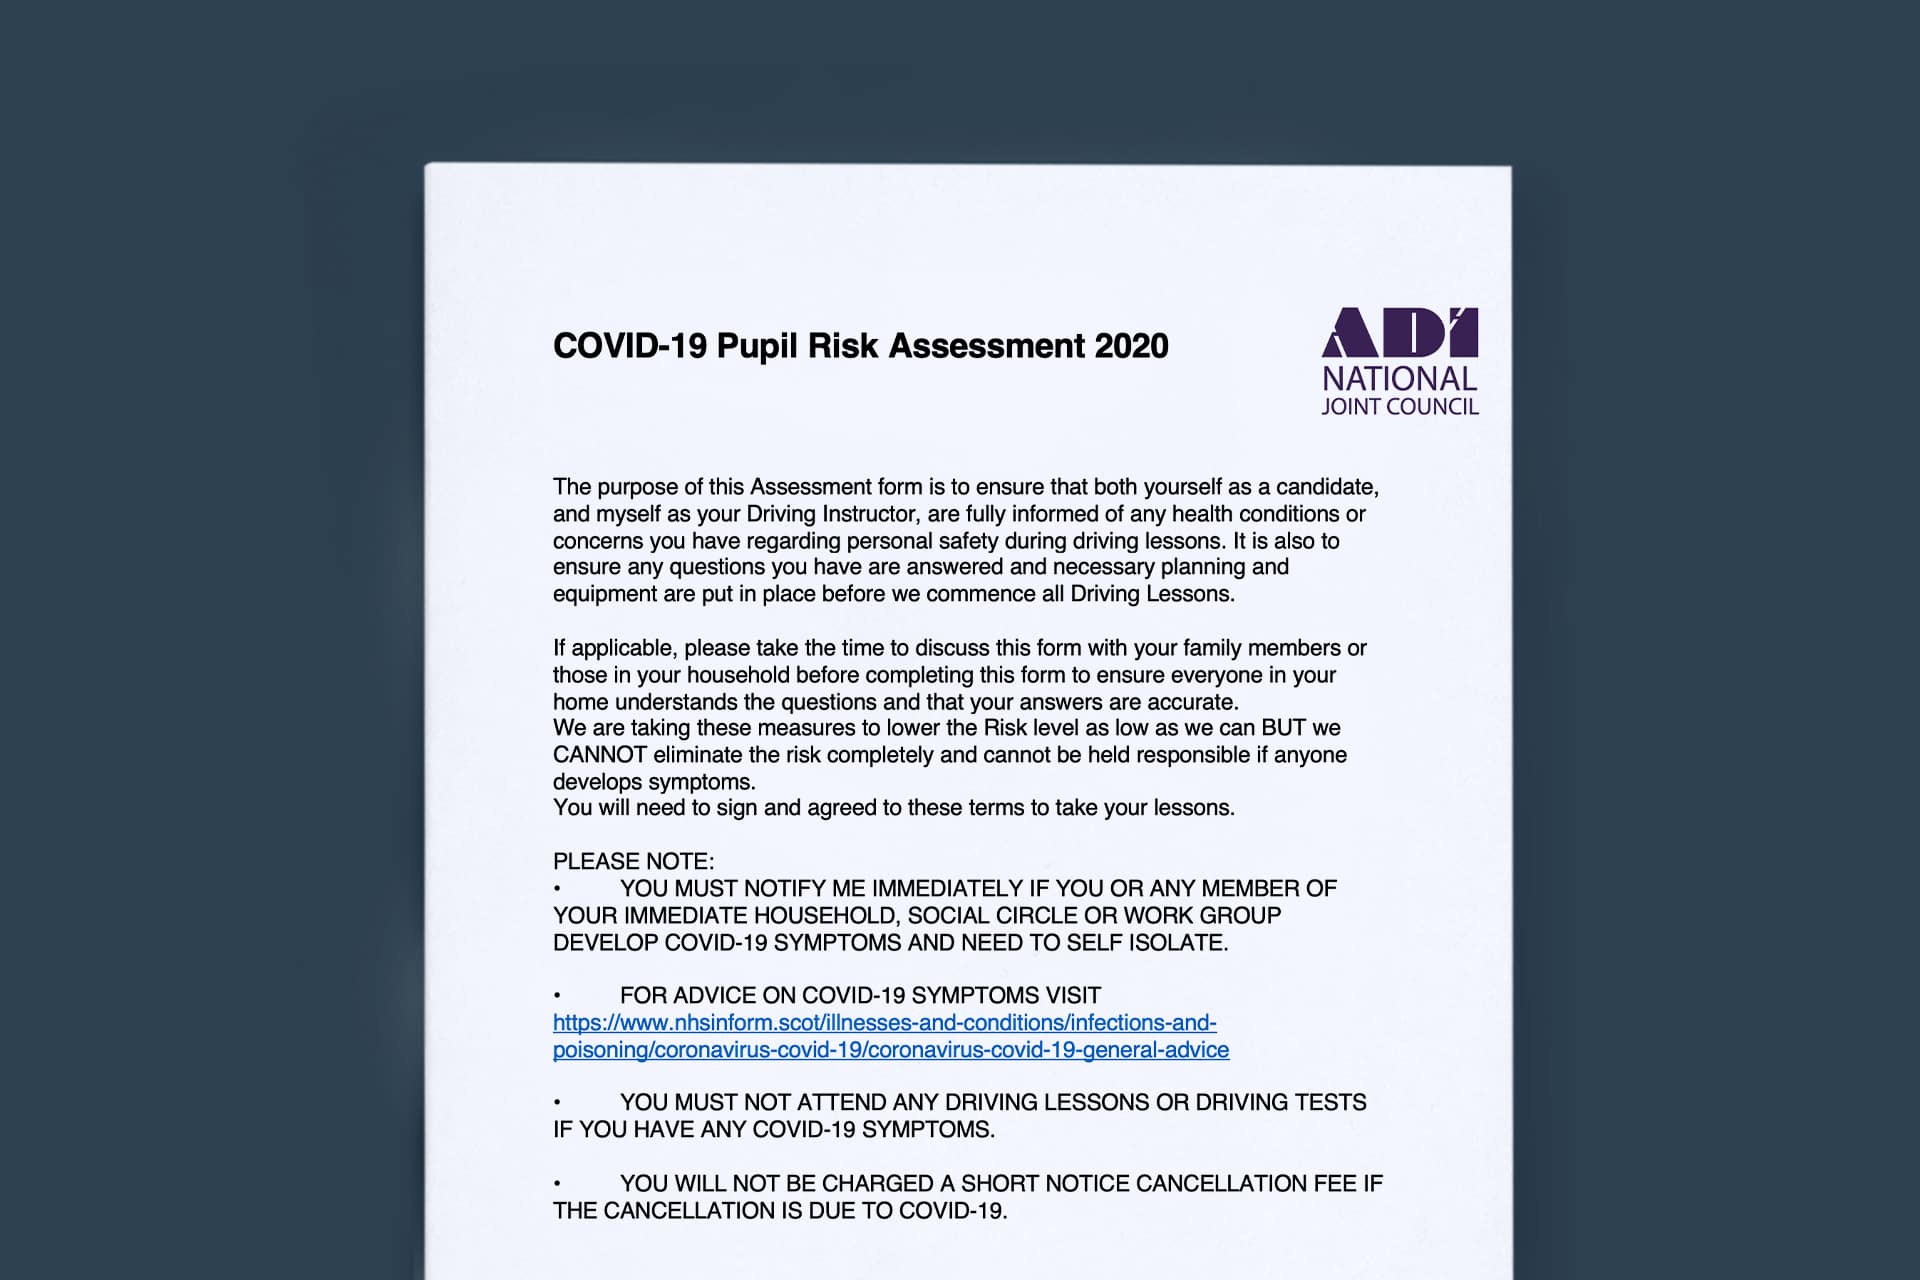 COVID-19 Pupil Risk Assessment Suggested questions to use on Google forms or to sent as an email attachment